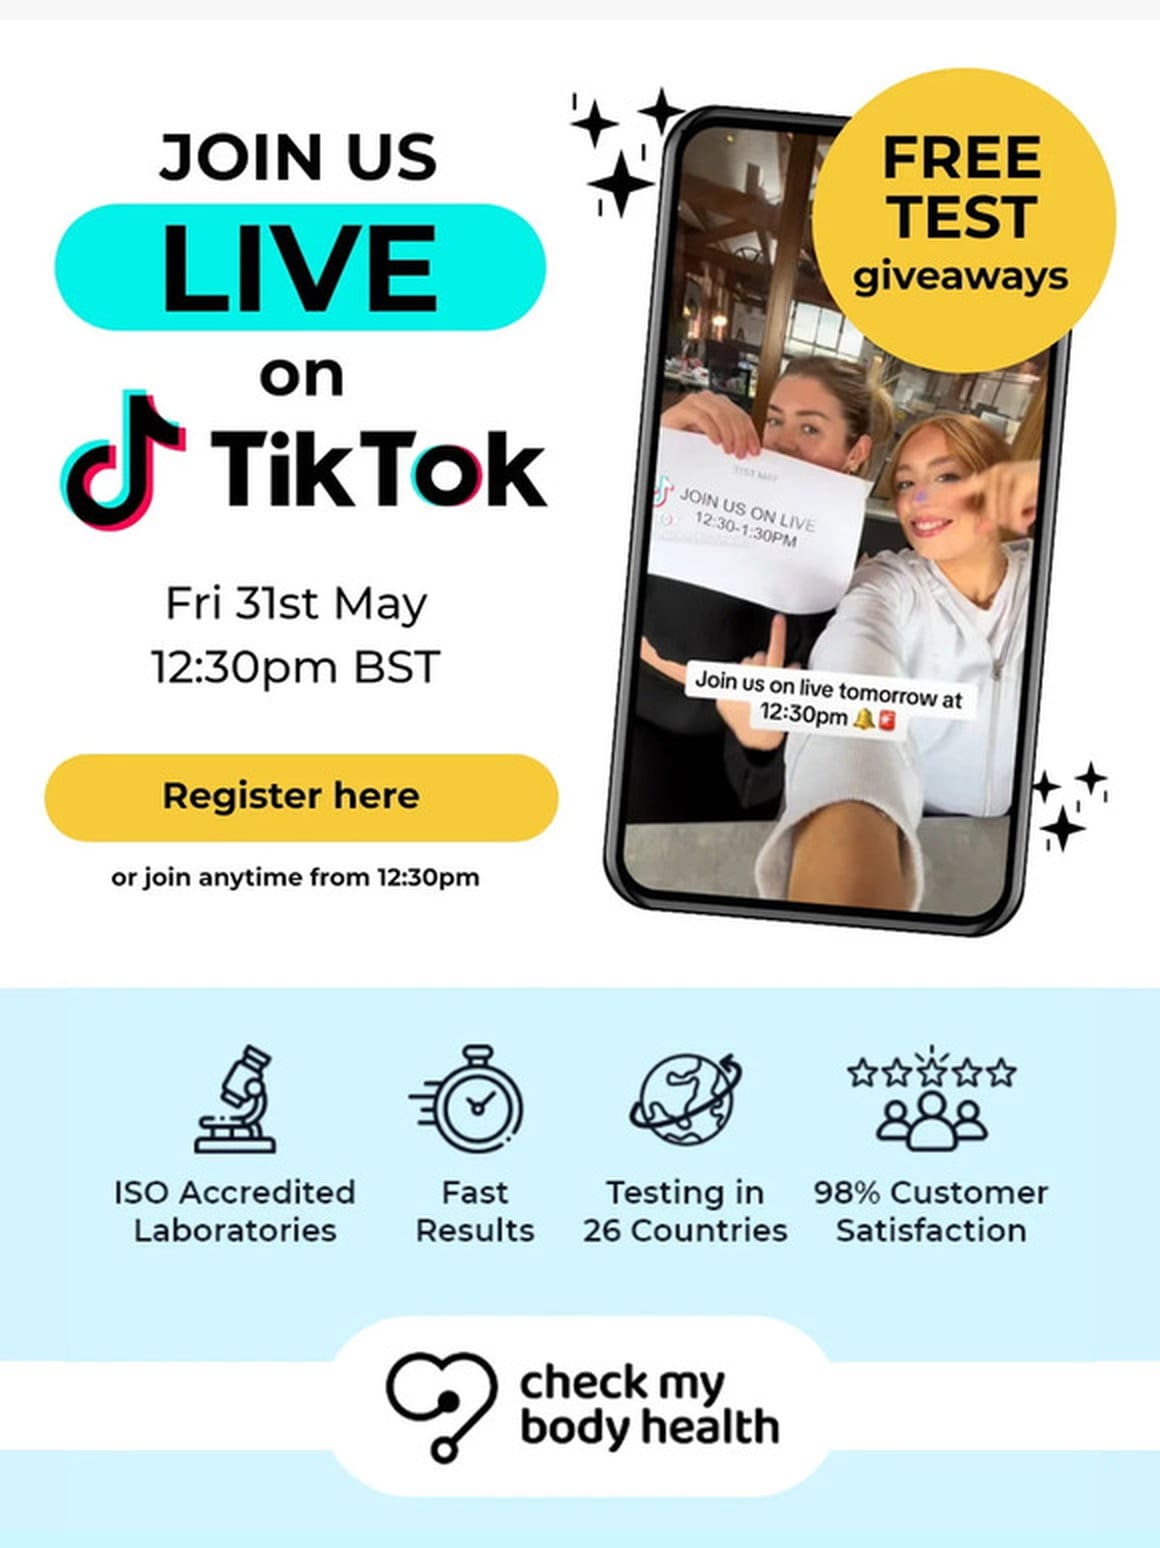 Live on TikTok: Join us for exclusive giveaways!